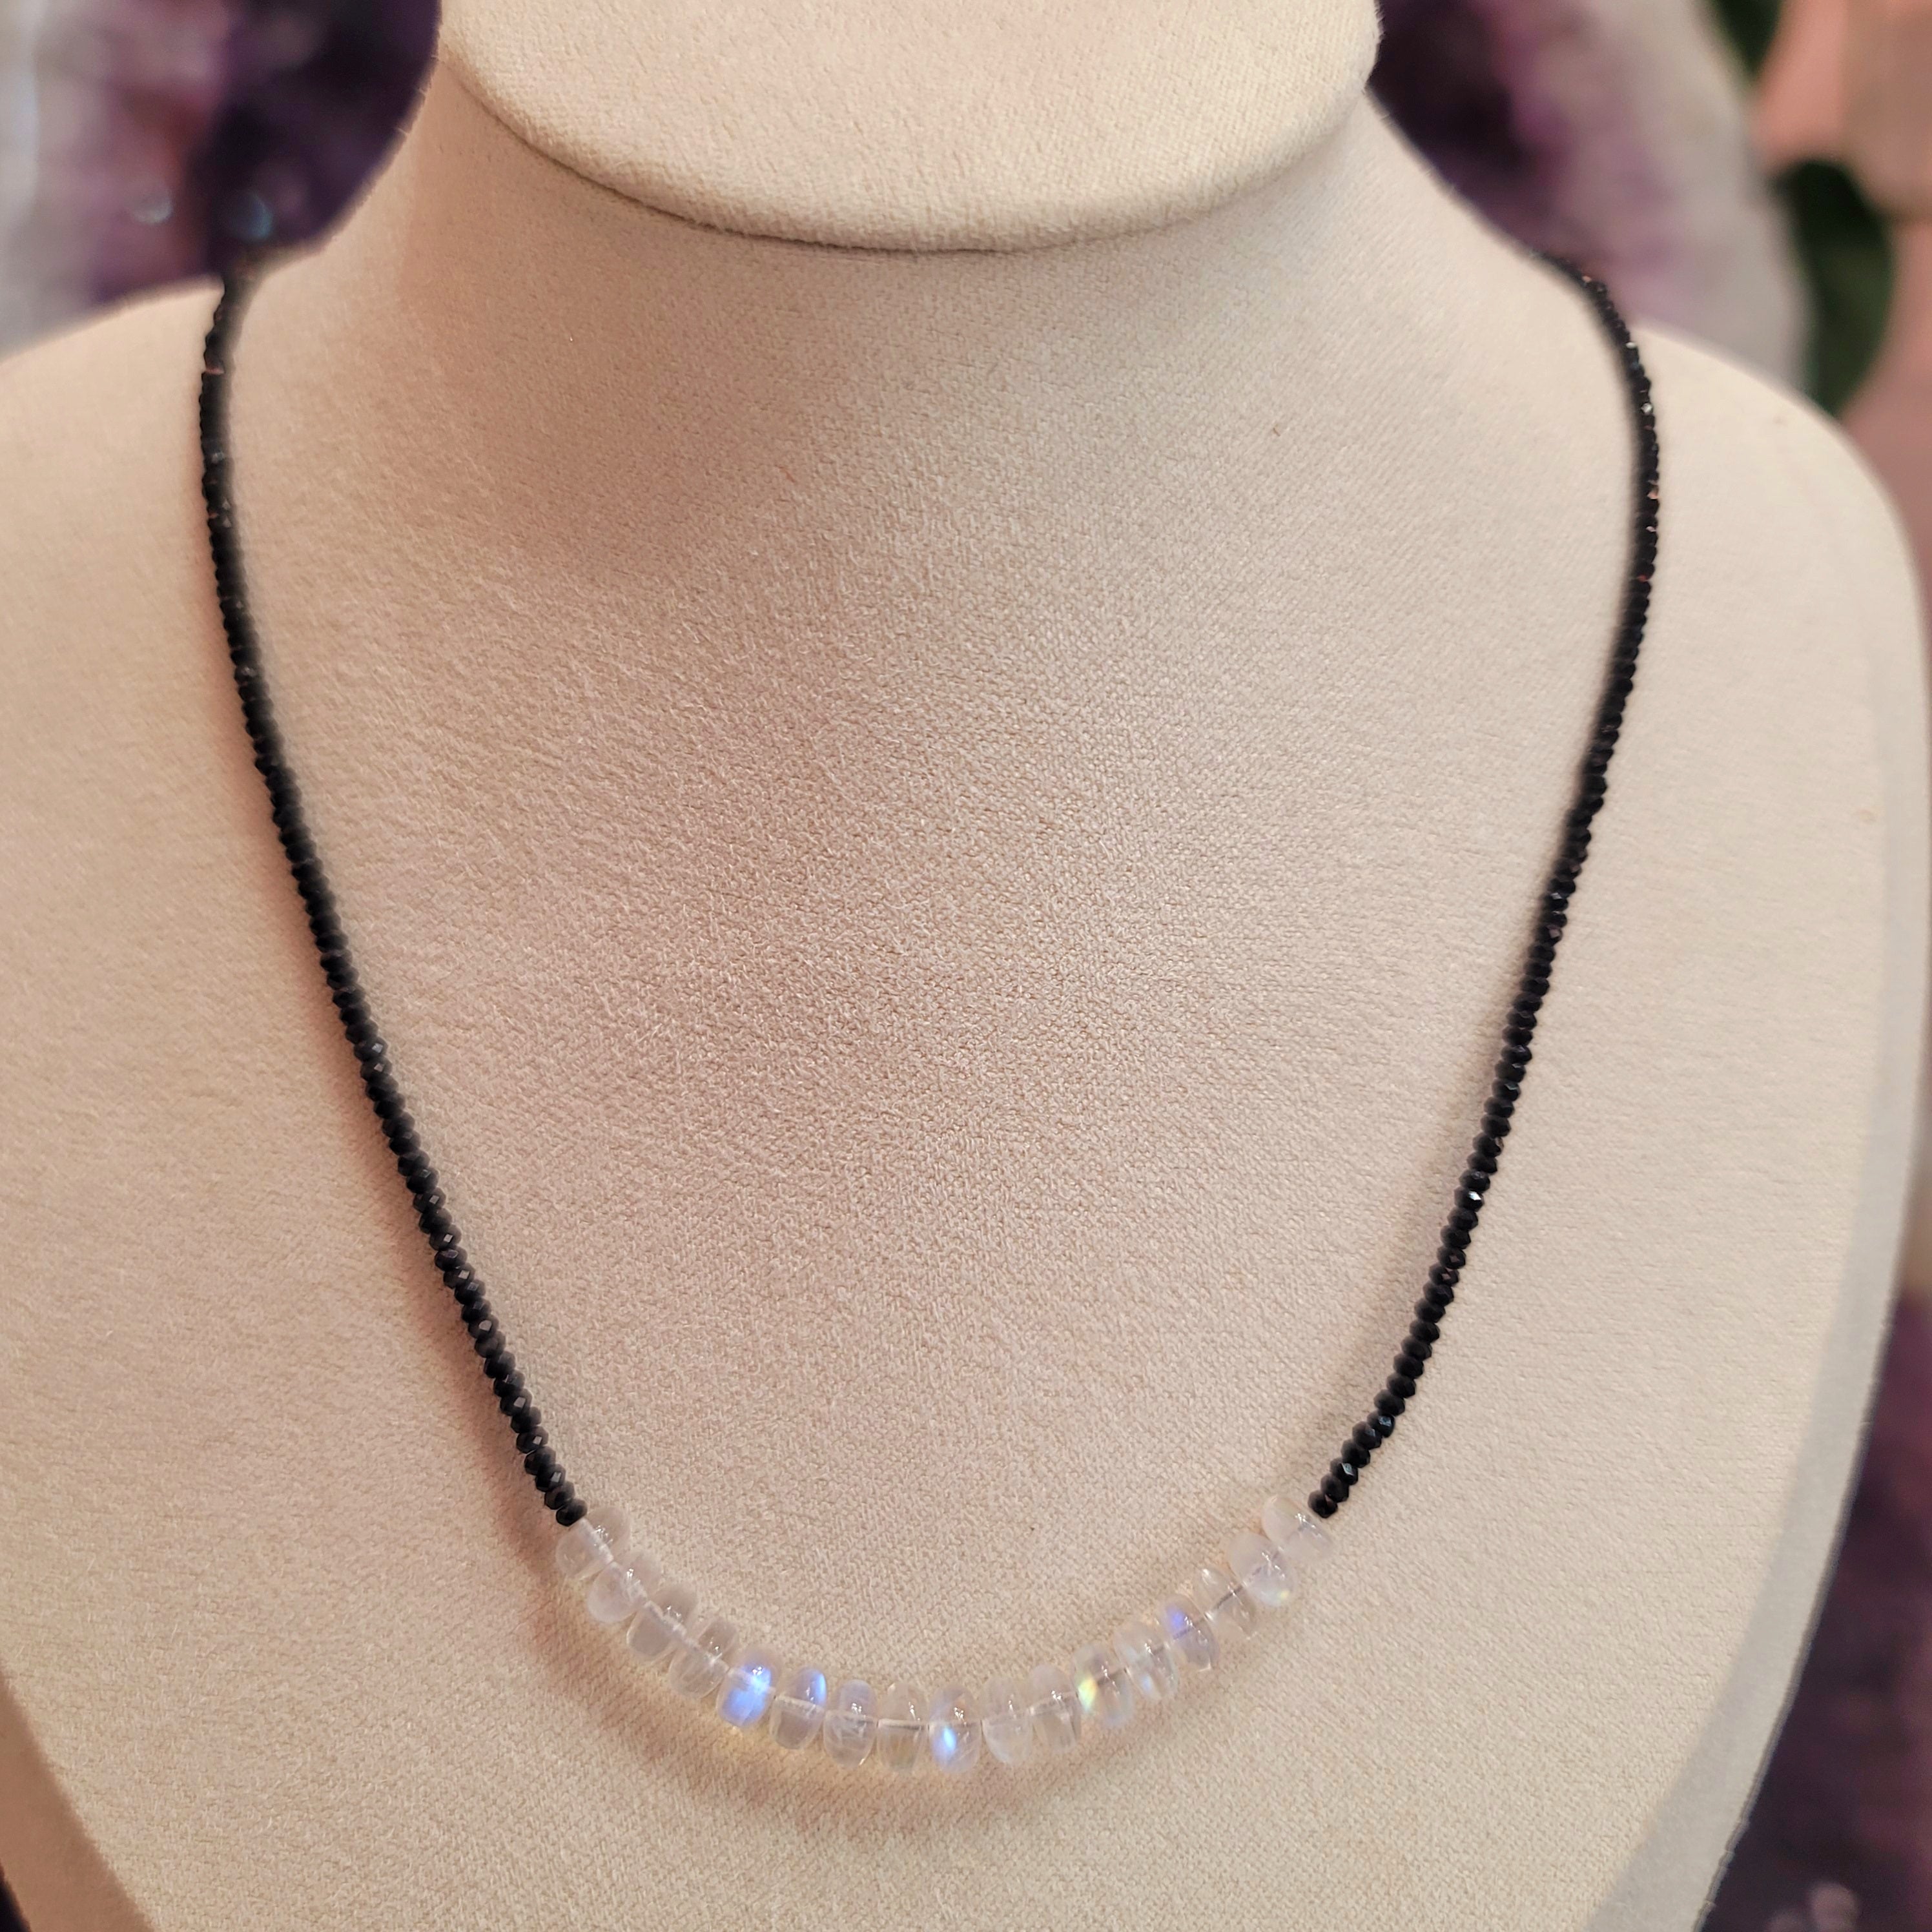 Black Spinel With Rainbow Moonstone Micro Faceted Necklace